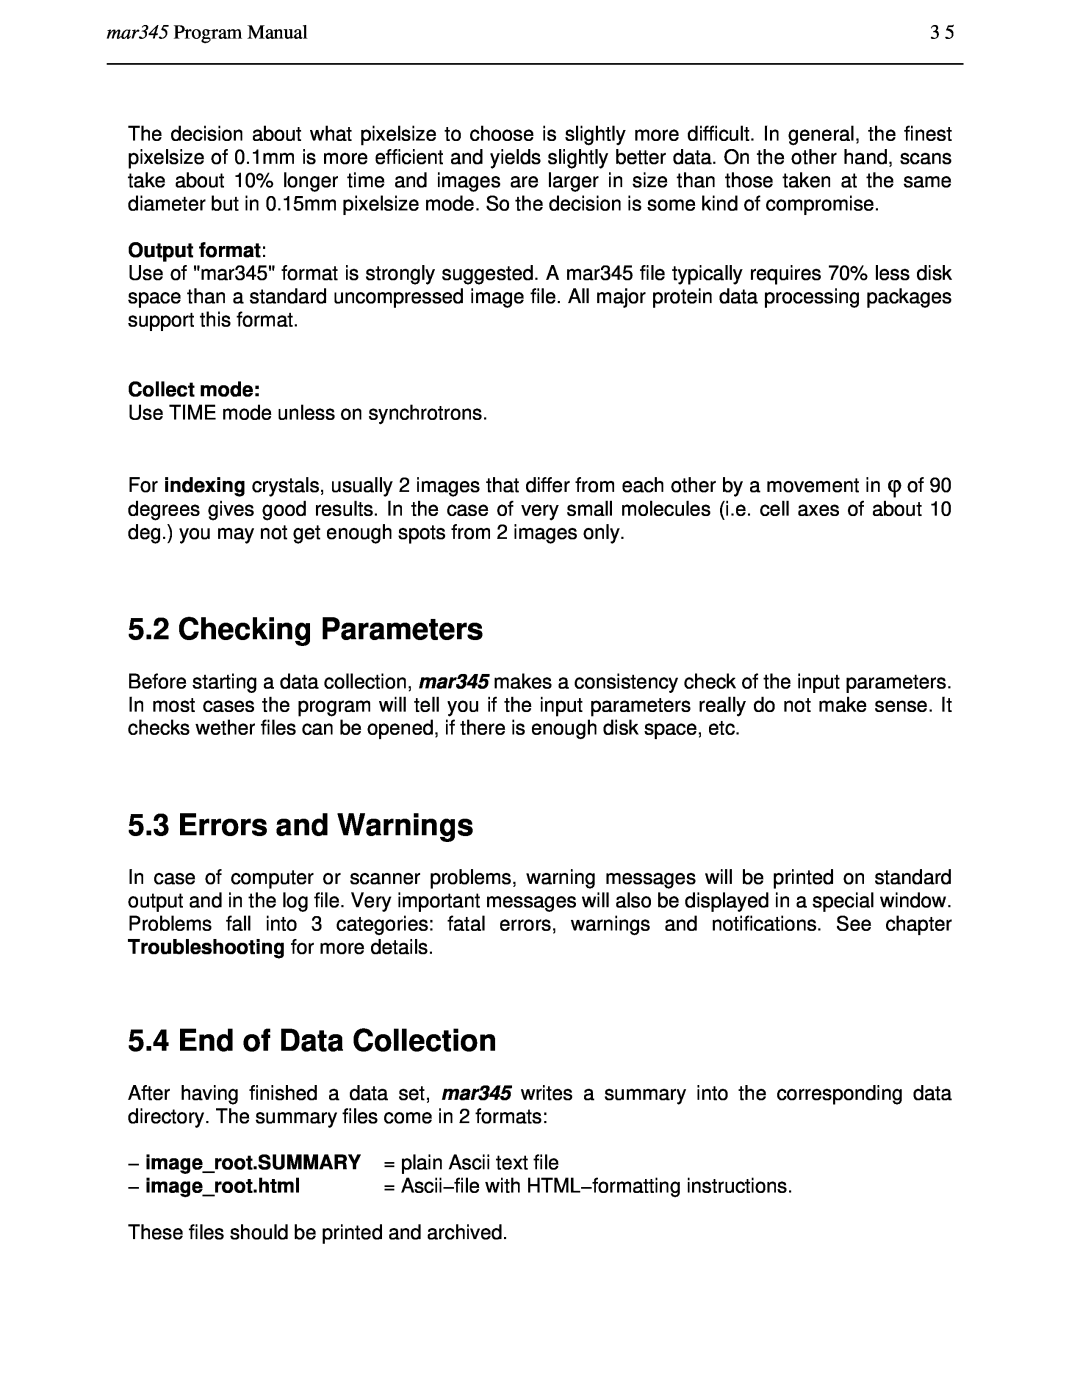 Compaq manual Checking Parameters, Errors and Warnings, End of Data Collection, mar345 Program Manual, Output format 